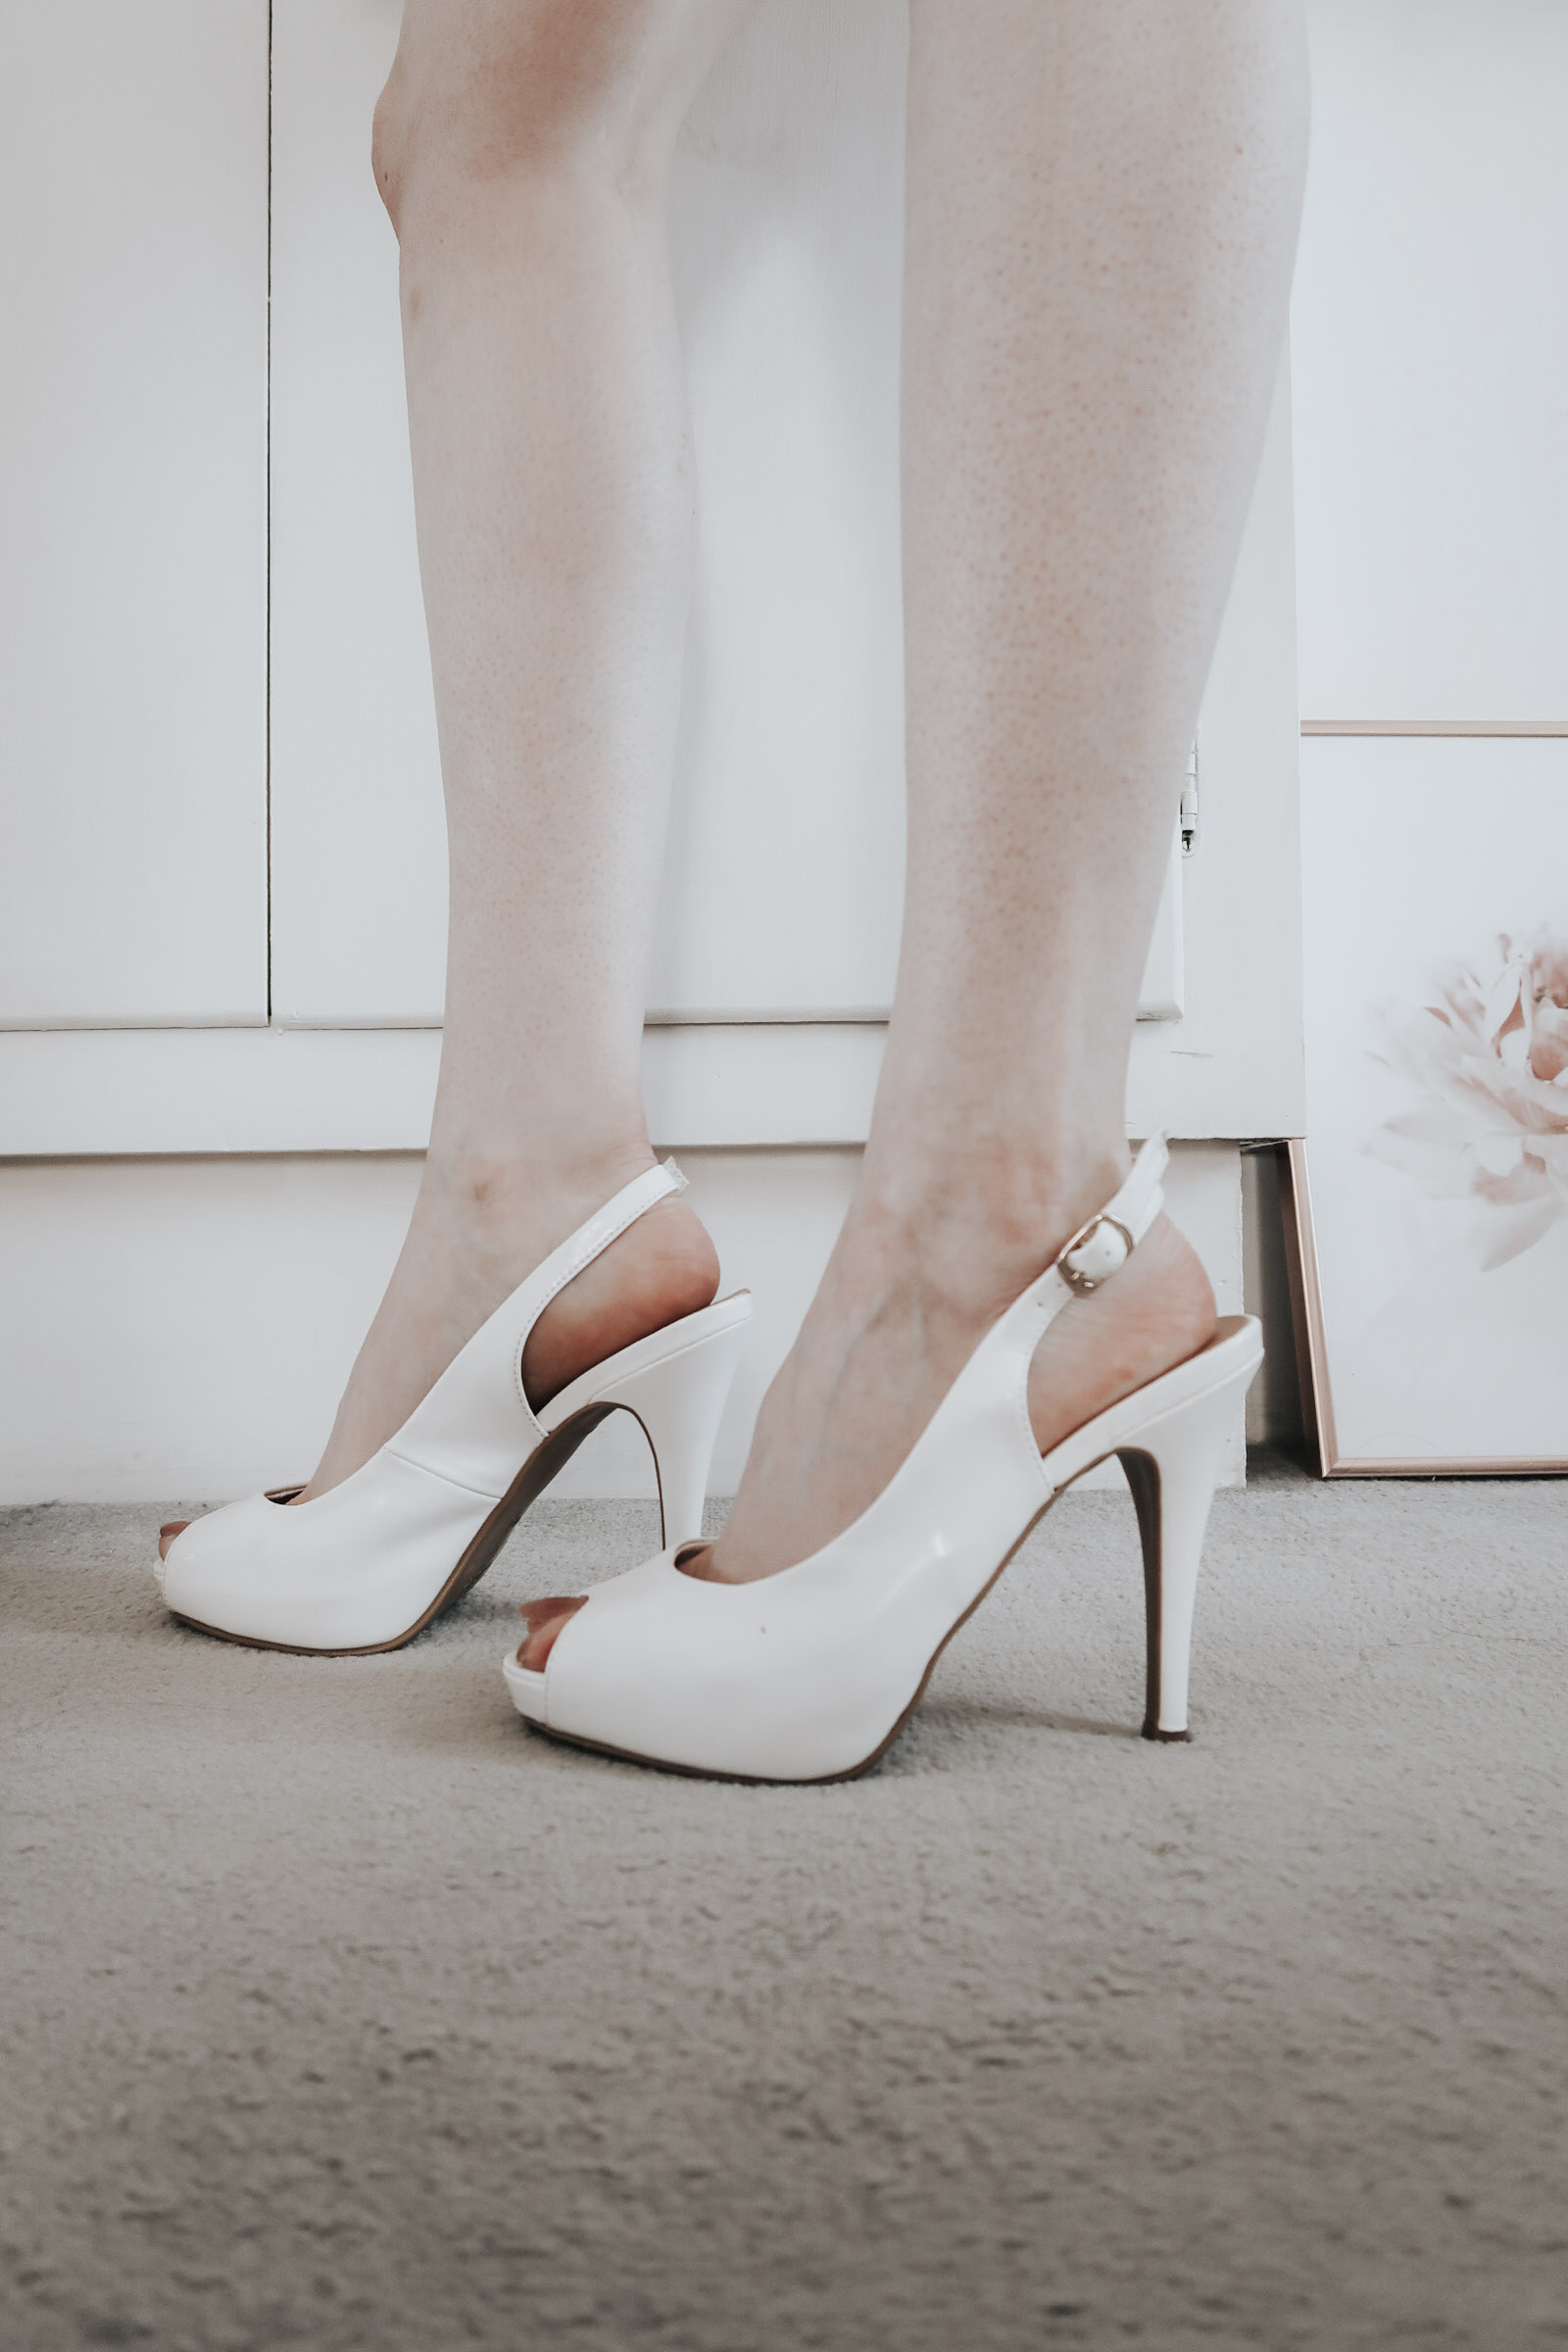 Science weighs in on high heels: Not designed for running | The Seattle  Times